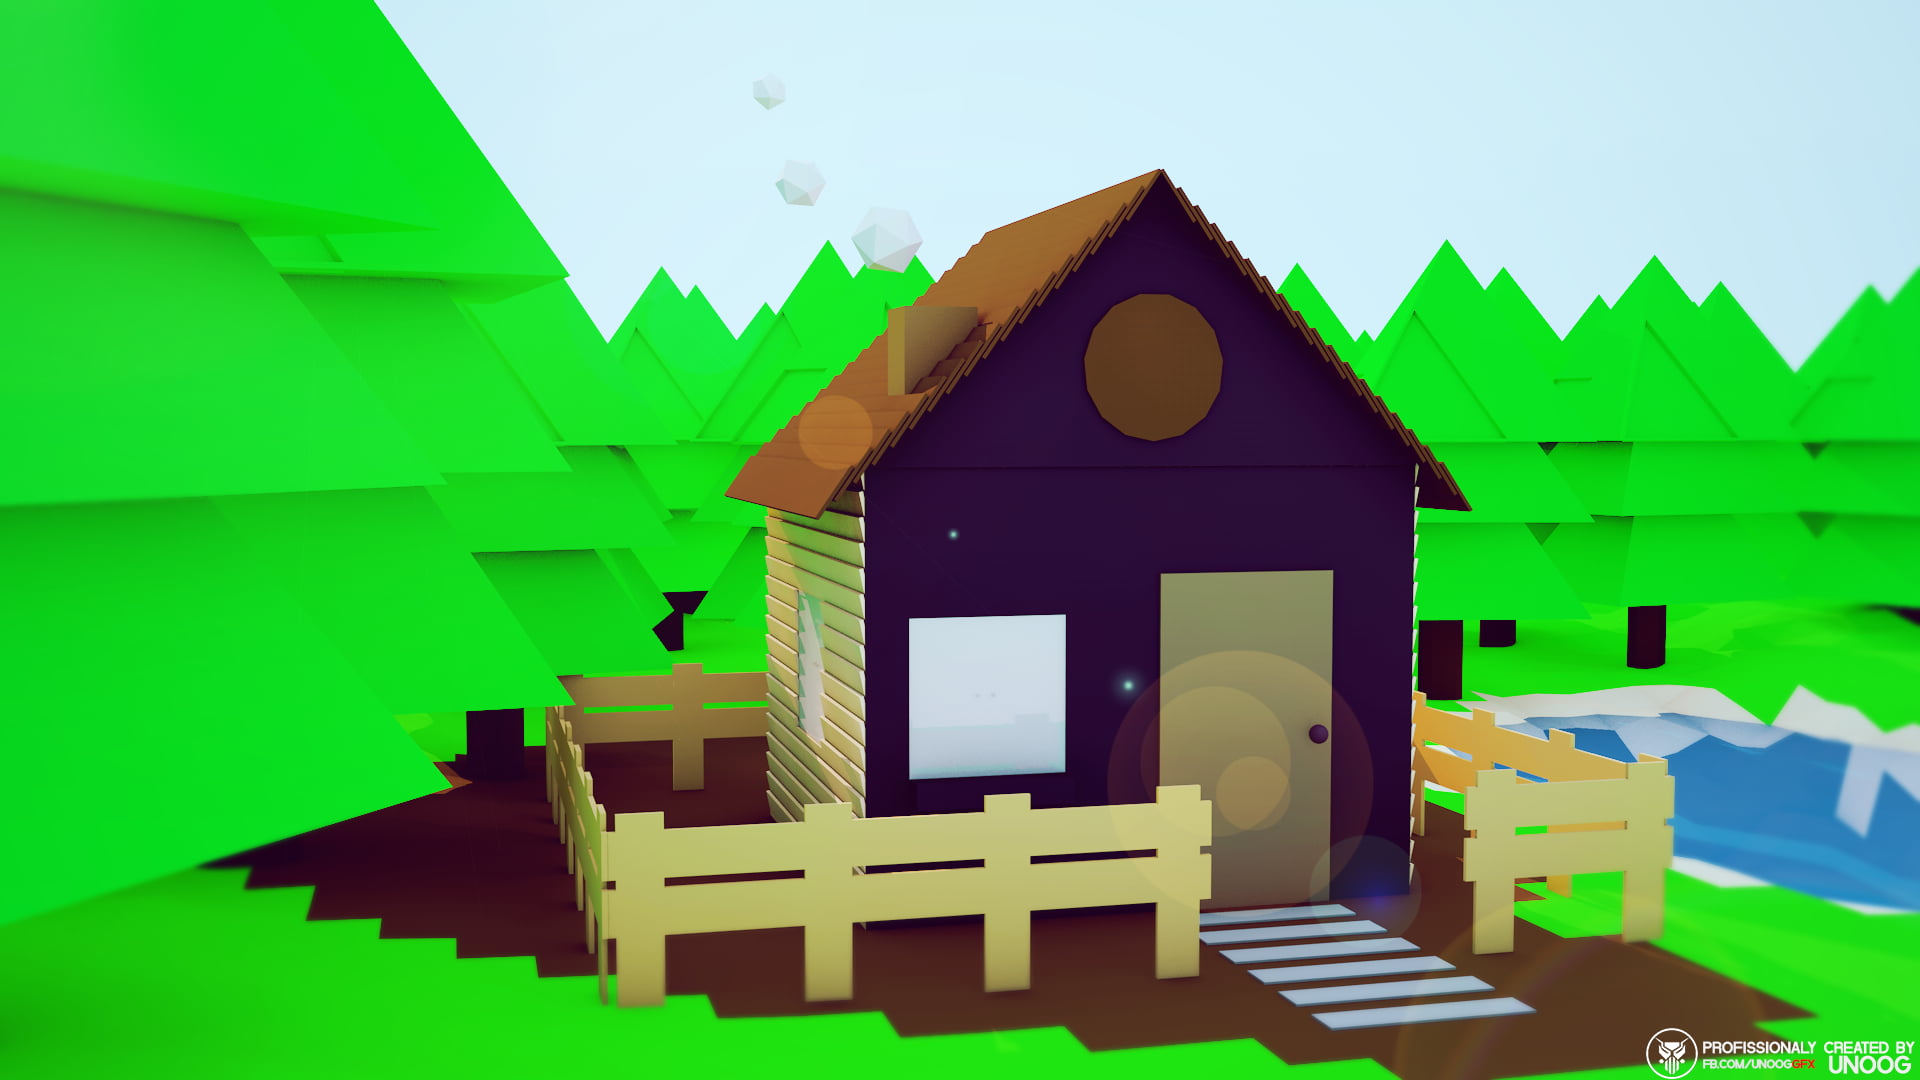 black and brown house illustration, low poly, house, mountains